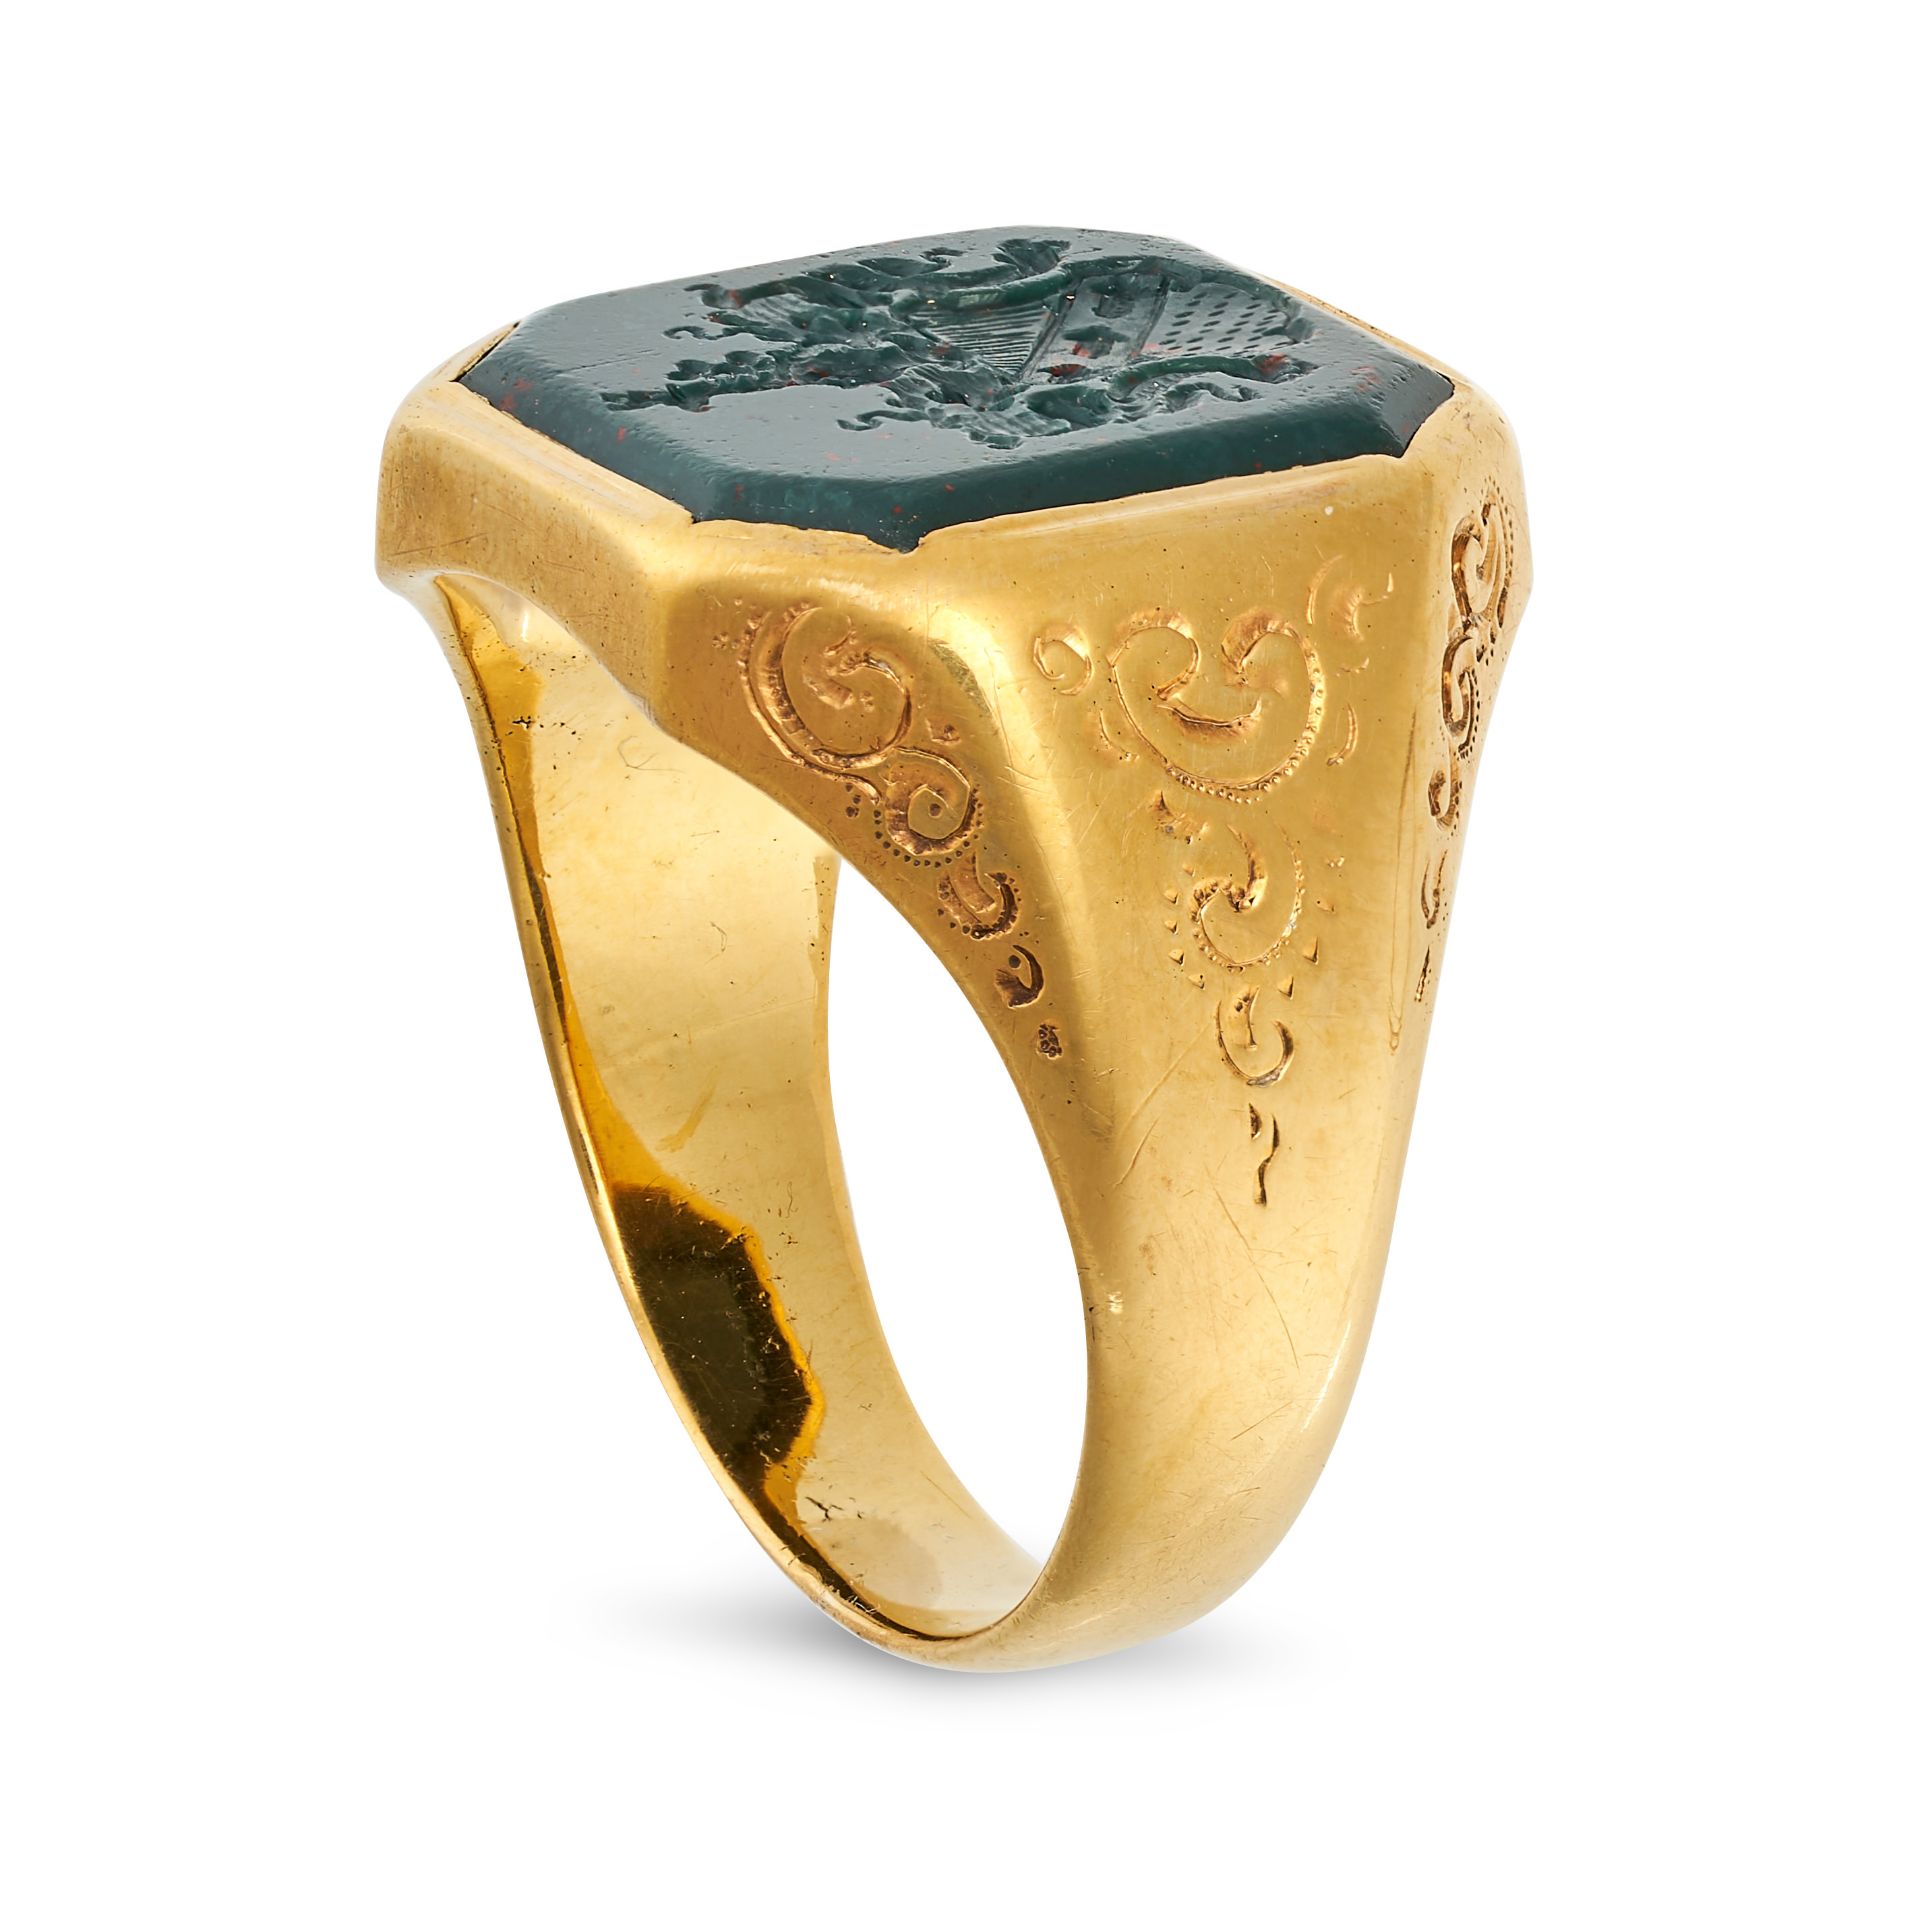 AN ANTIQUE BLOODSTONE INTAGLIO RING in yellow gold, set with an octagonal bloodstone intaglio eng... - Image 2 of 2